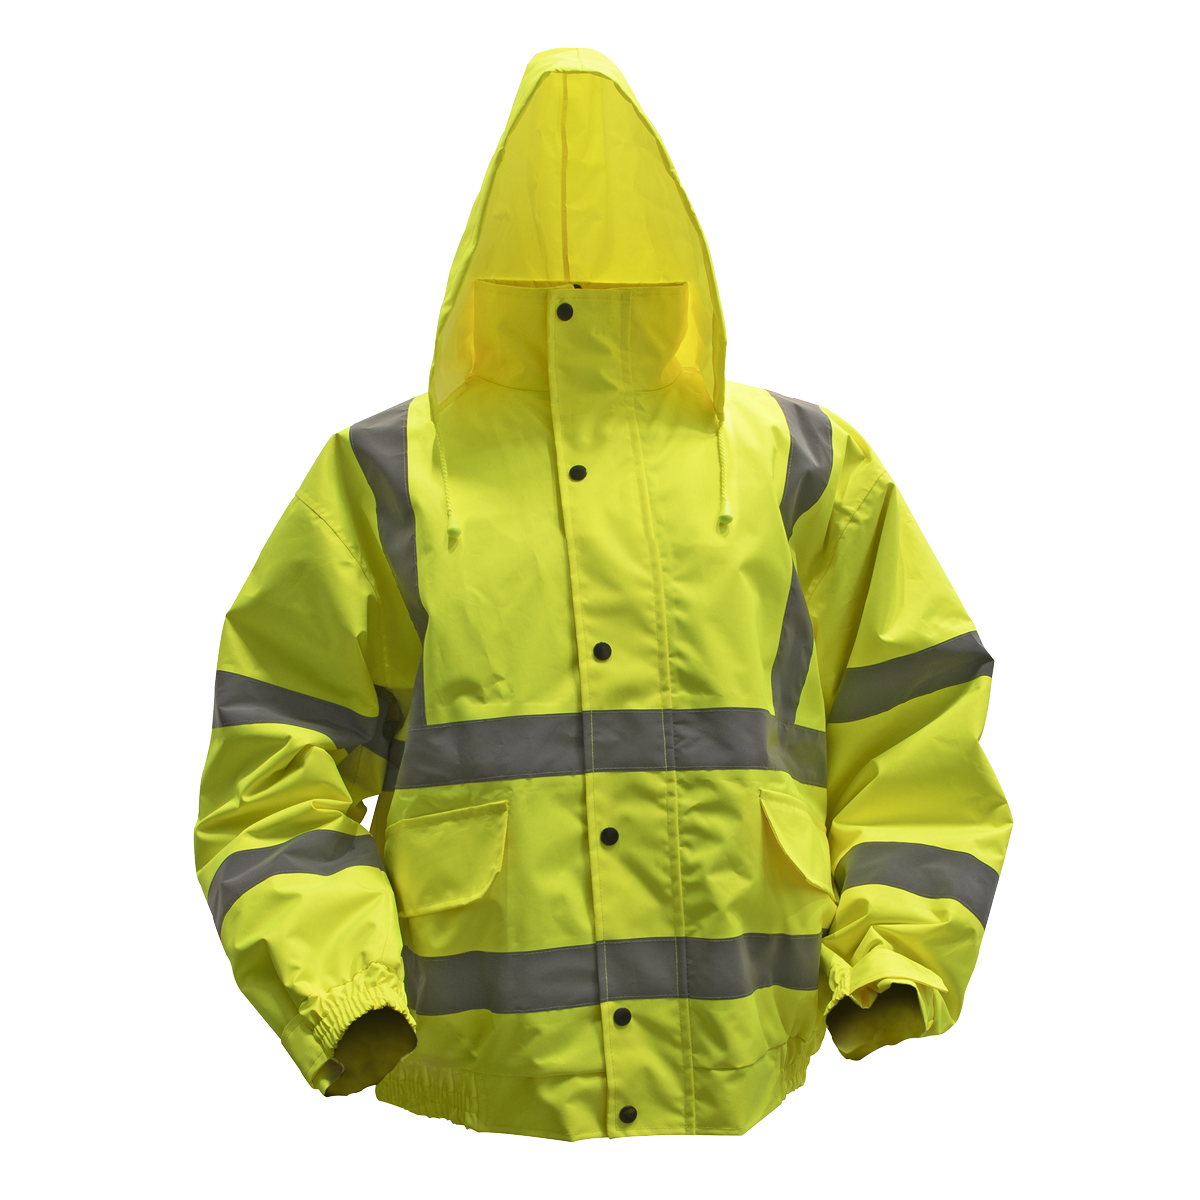 Hi-Vis Yellow Jacket with Quilted Lining & Elasticated Waist